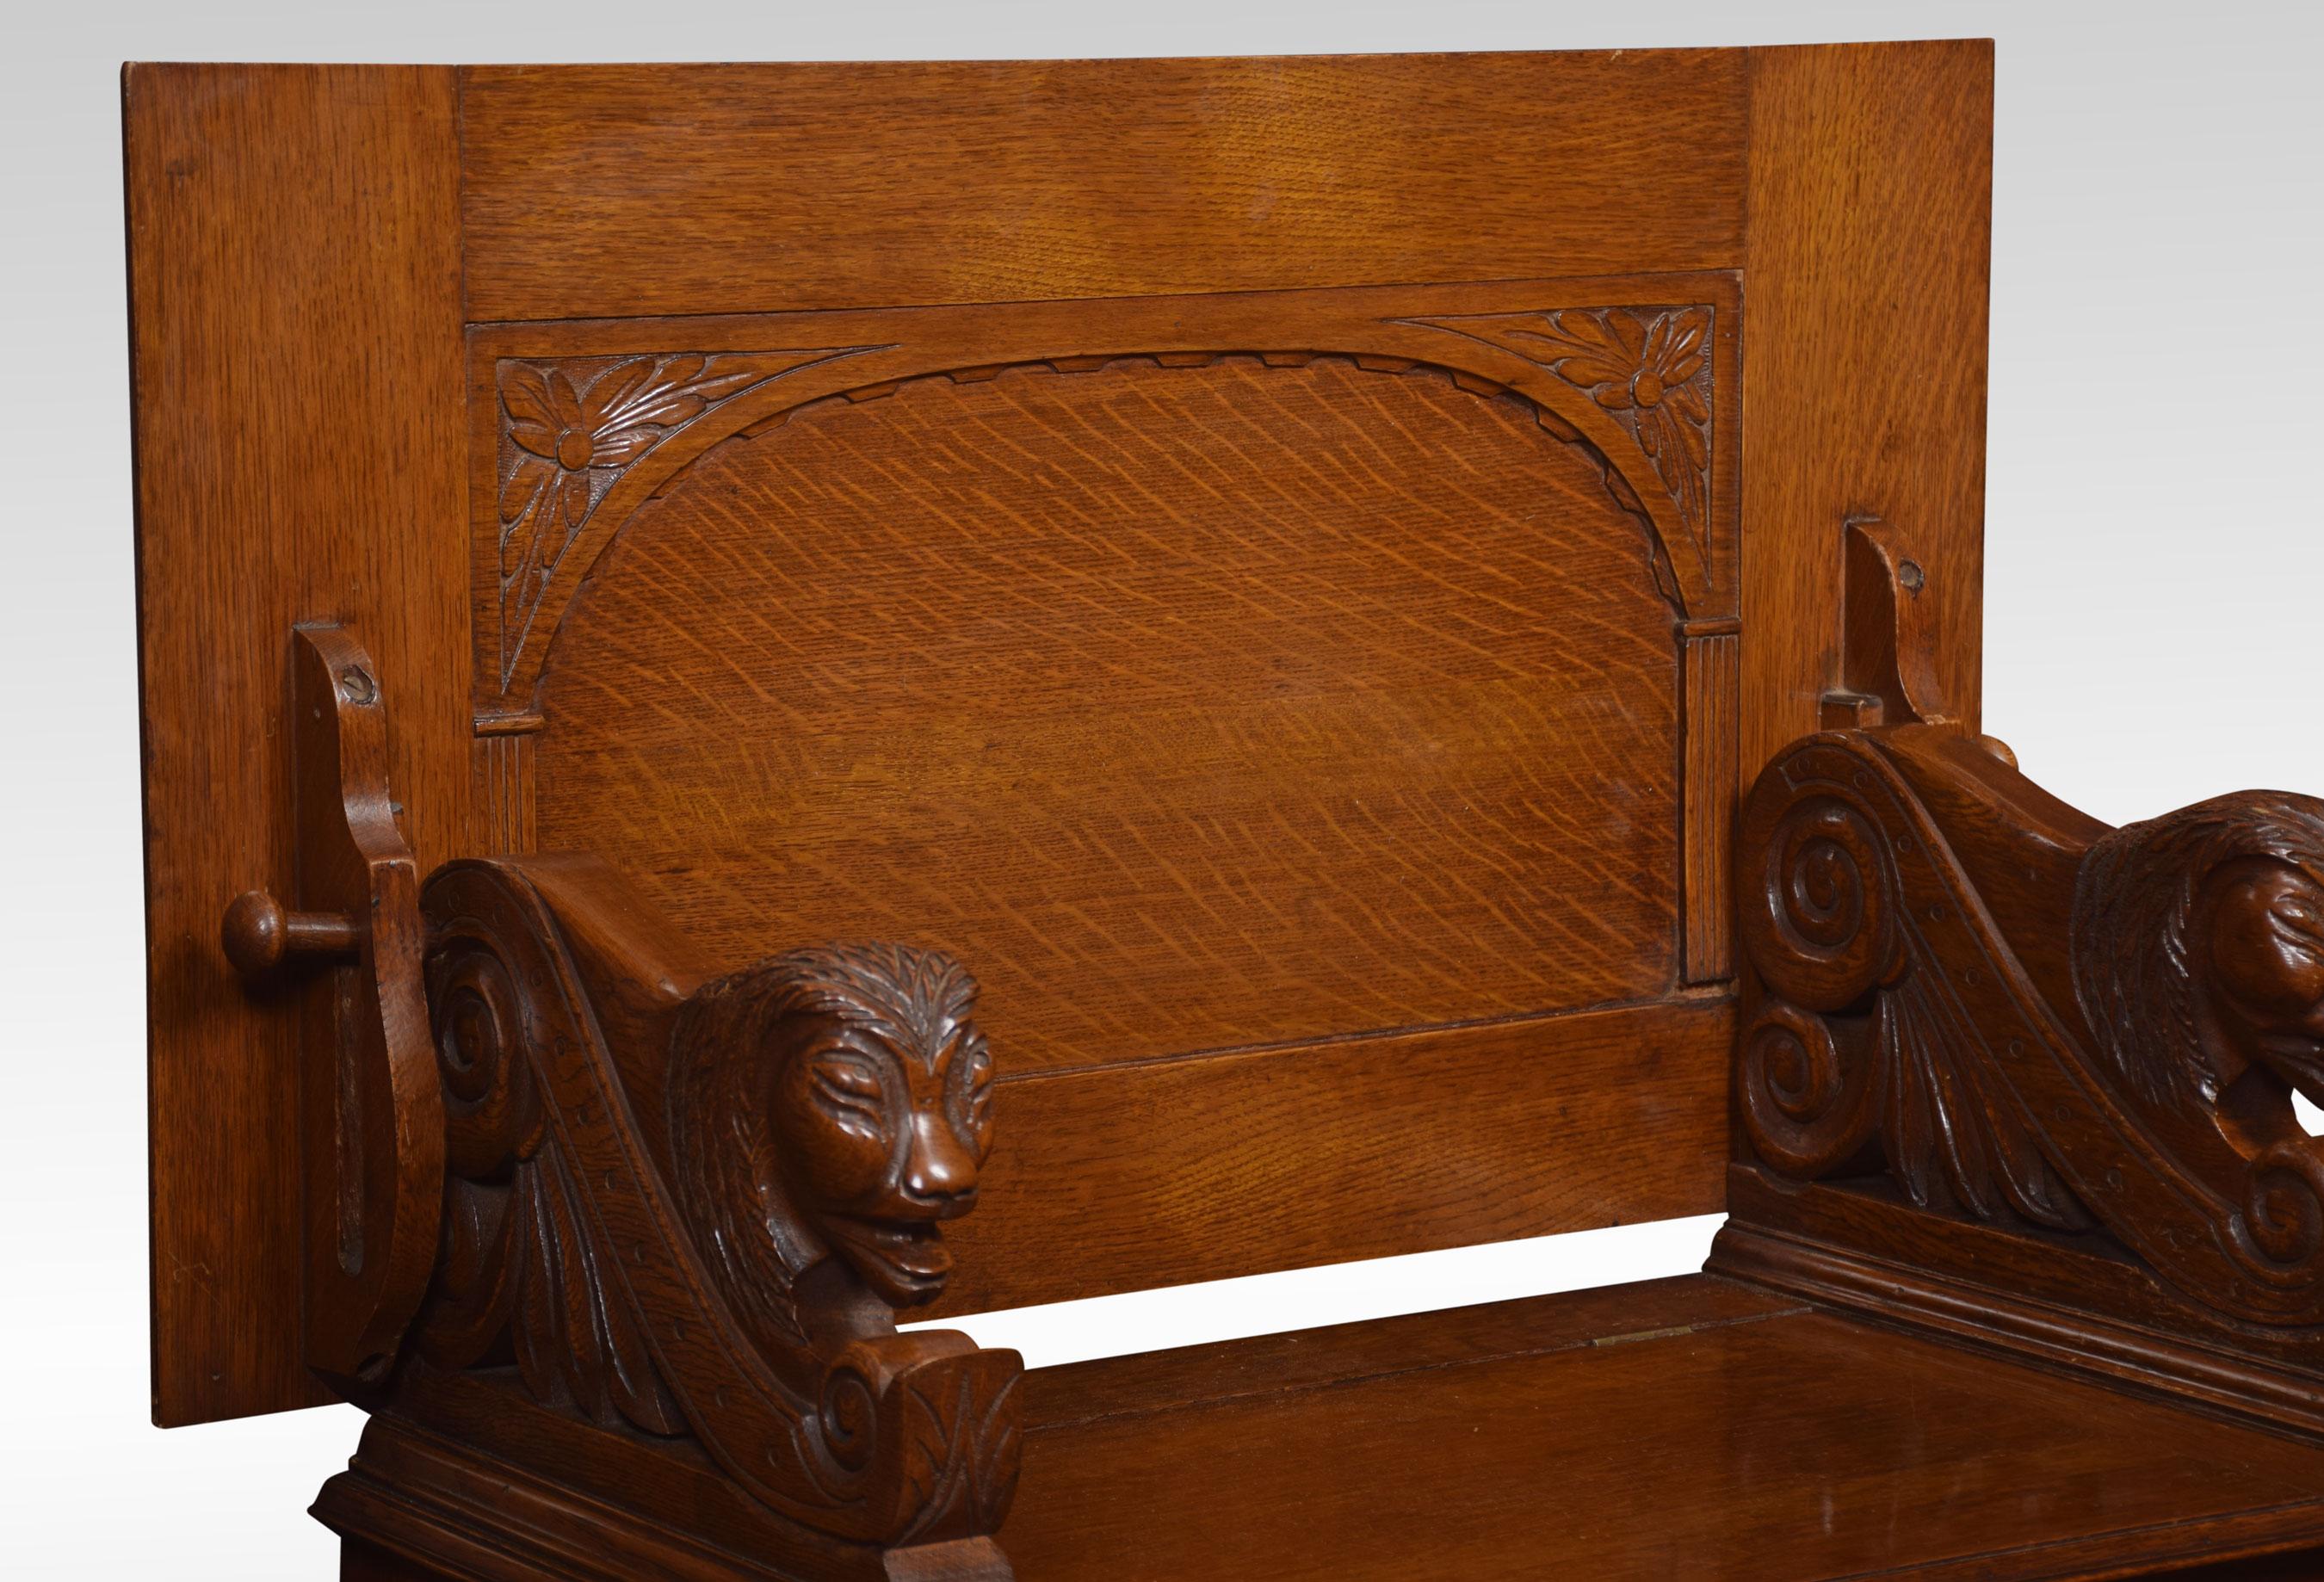 Oak monks bench of narrow proportions, the rectangular hinged floral carved back, above a box base with hinged lid flanked by a lion armrests. All raised up on bun feet.
Dimensions
Height 39 inches height to seat 18 inches
Width 36 inches
Depth